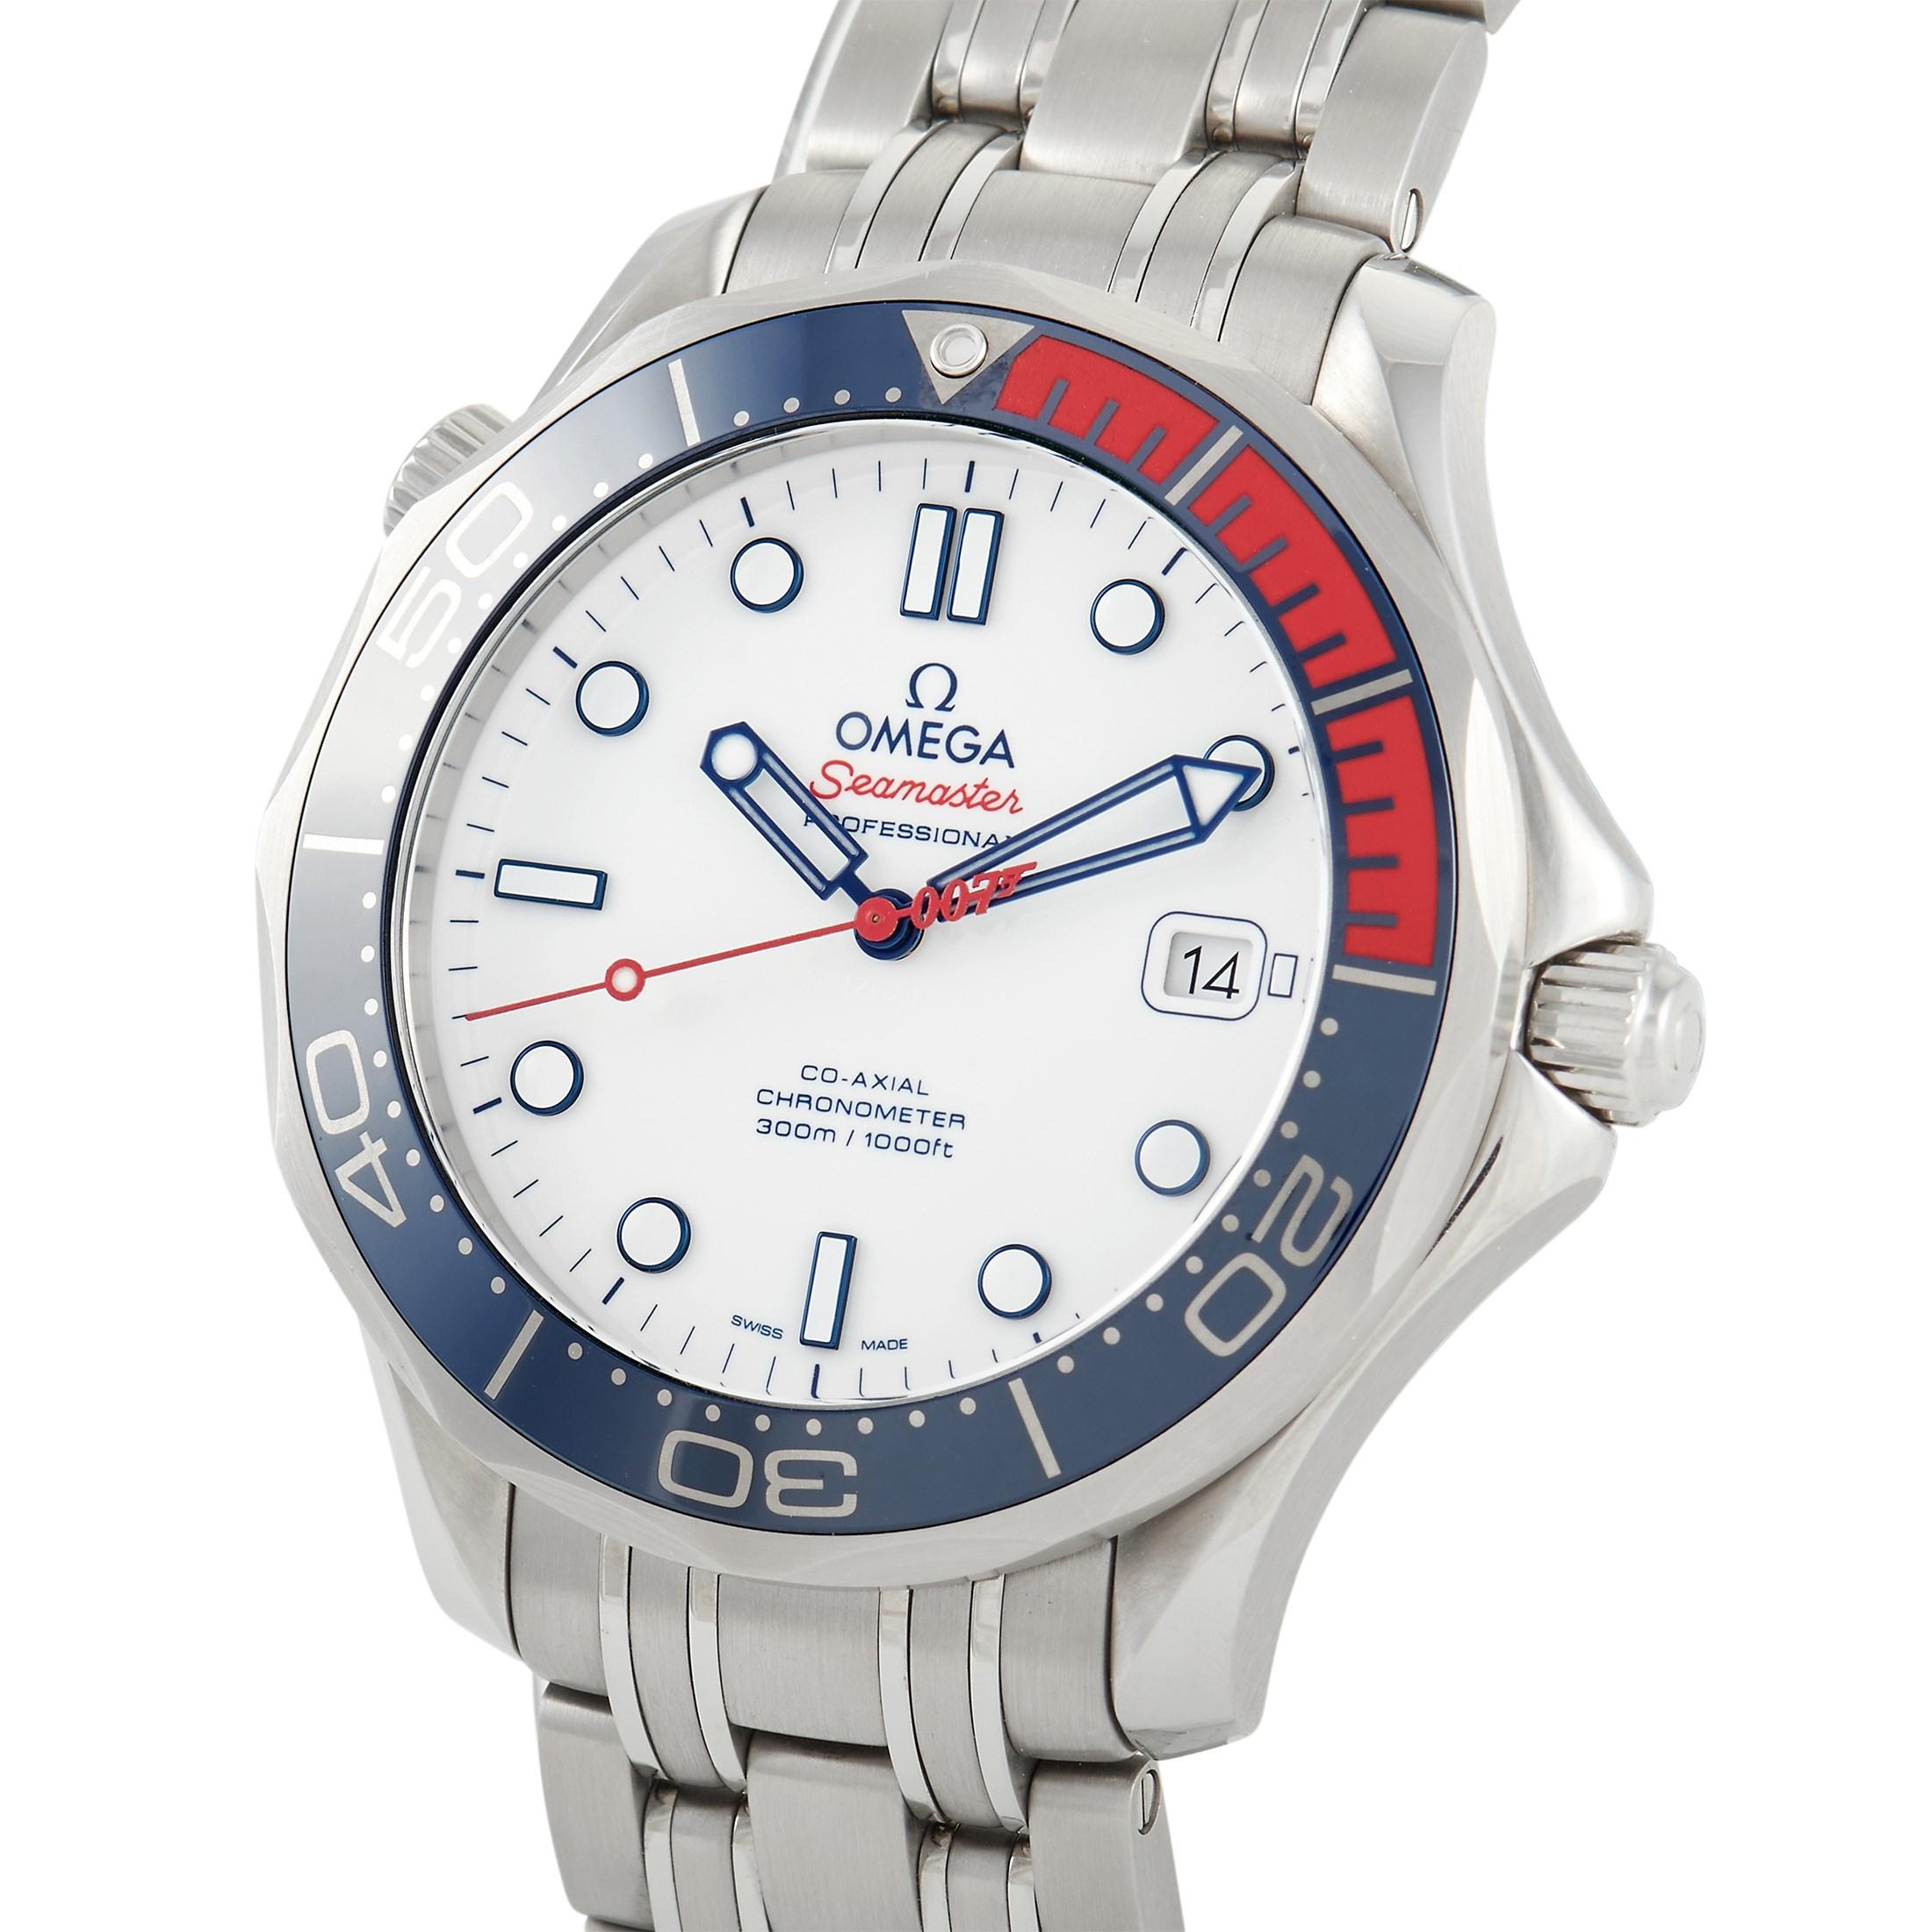 Own one of the 7,007 limited pieces of this Commander's Watch. The OMEGA James Bond 007 Chronometer Watch 212.32.41.20.04.001 features a brushed steel bezel with navy blue ceramic fill (15-minute scale in red), a brushed steel case with 